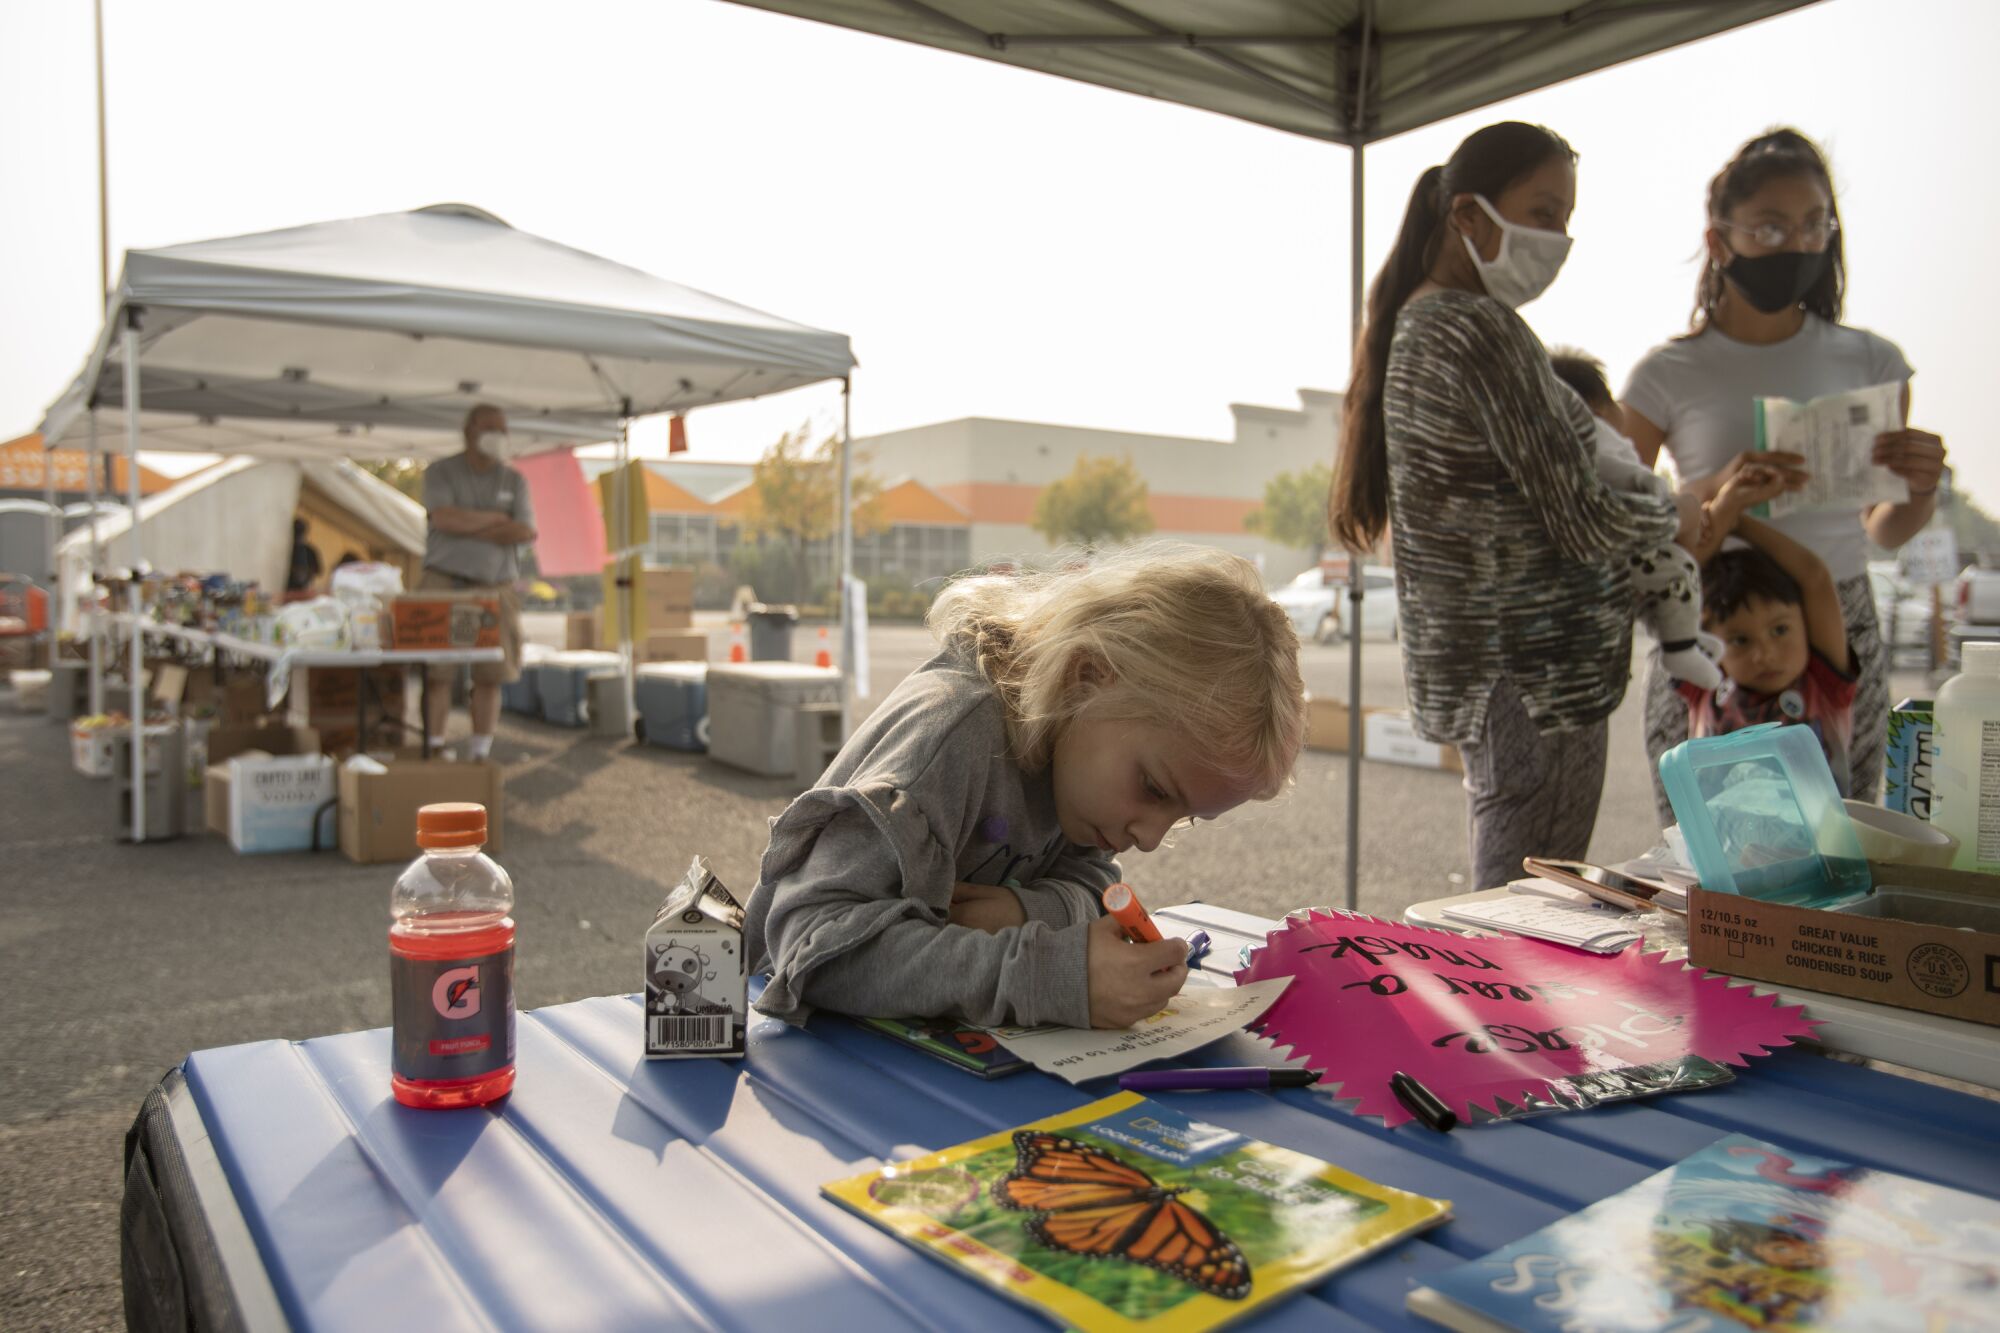 Cheyenne Brewer, age 7, who lost her home in the Almeda fire, colors at a donation center in Phoenix, Ore.